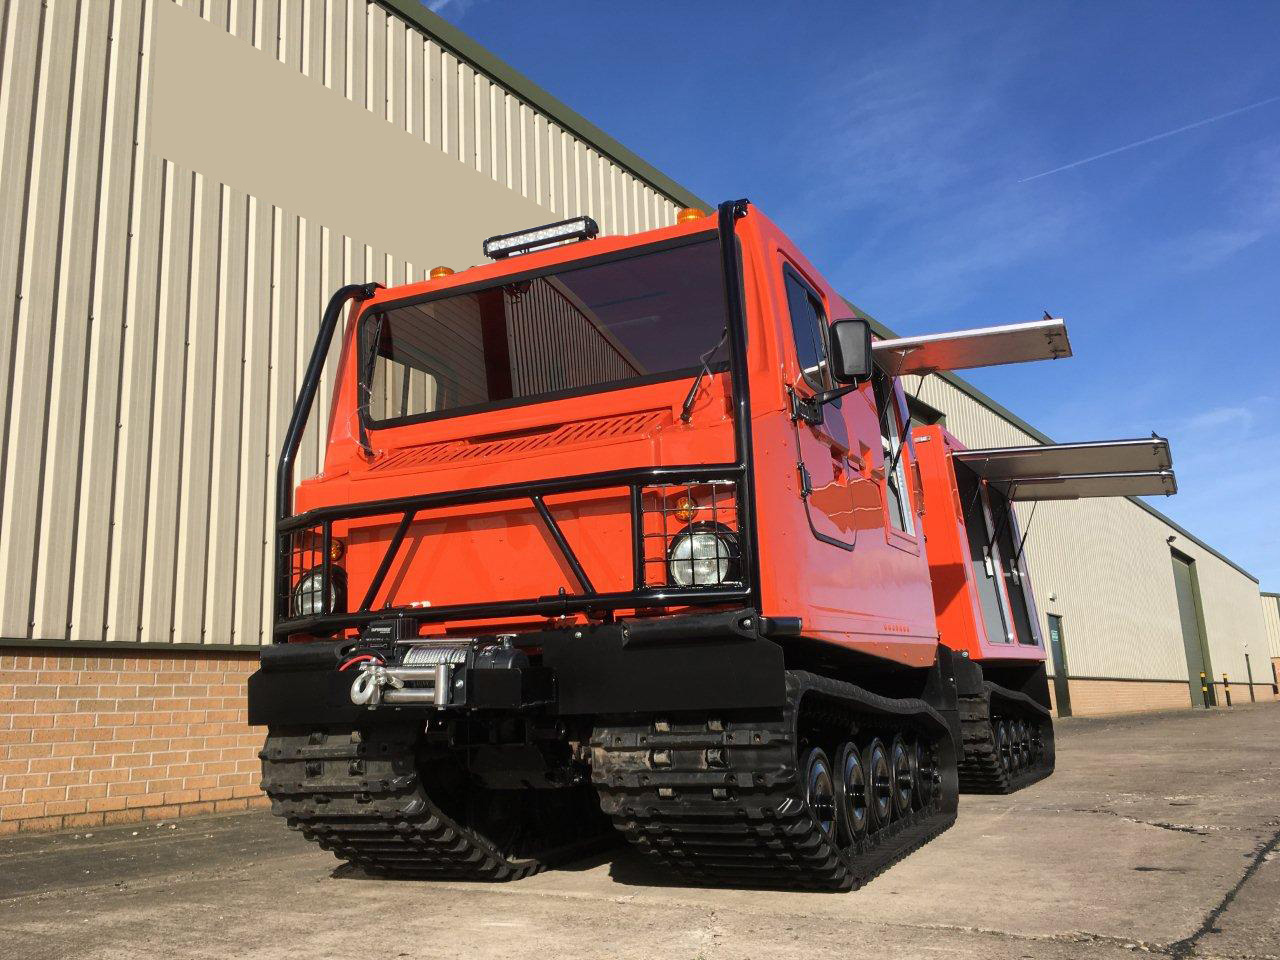 military vehicles for sale - <a href='/index.php/hagglund-bv206/models-available/50253-hagglund-bv206-multi-purpose-vehicle' title='Read more...' class='joodb_titletink'>Hagglund BV206 Multi-Purpose Vehicle</a>